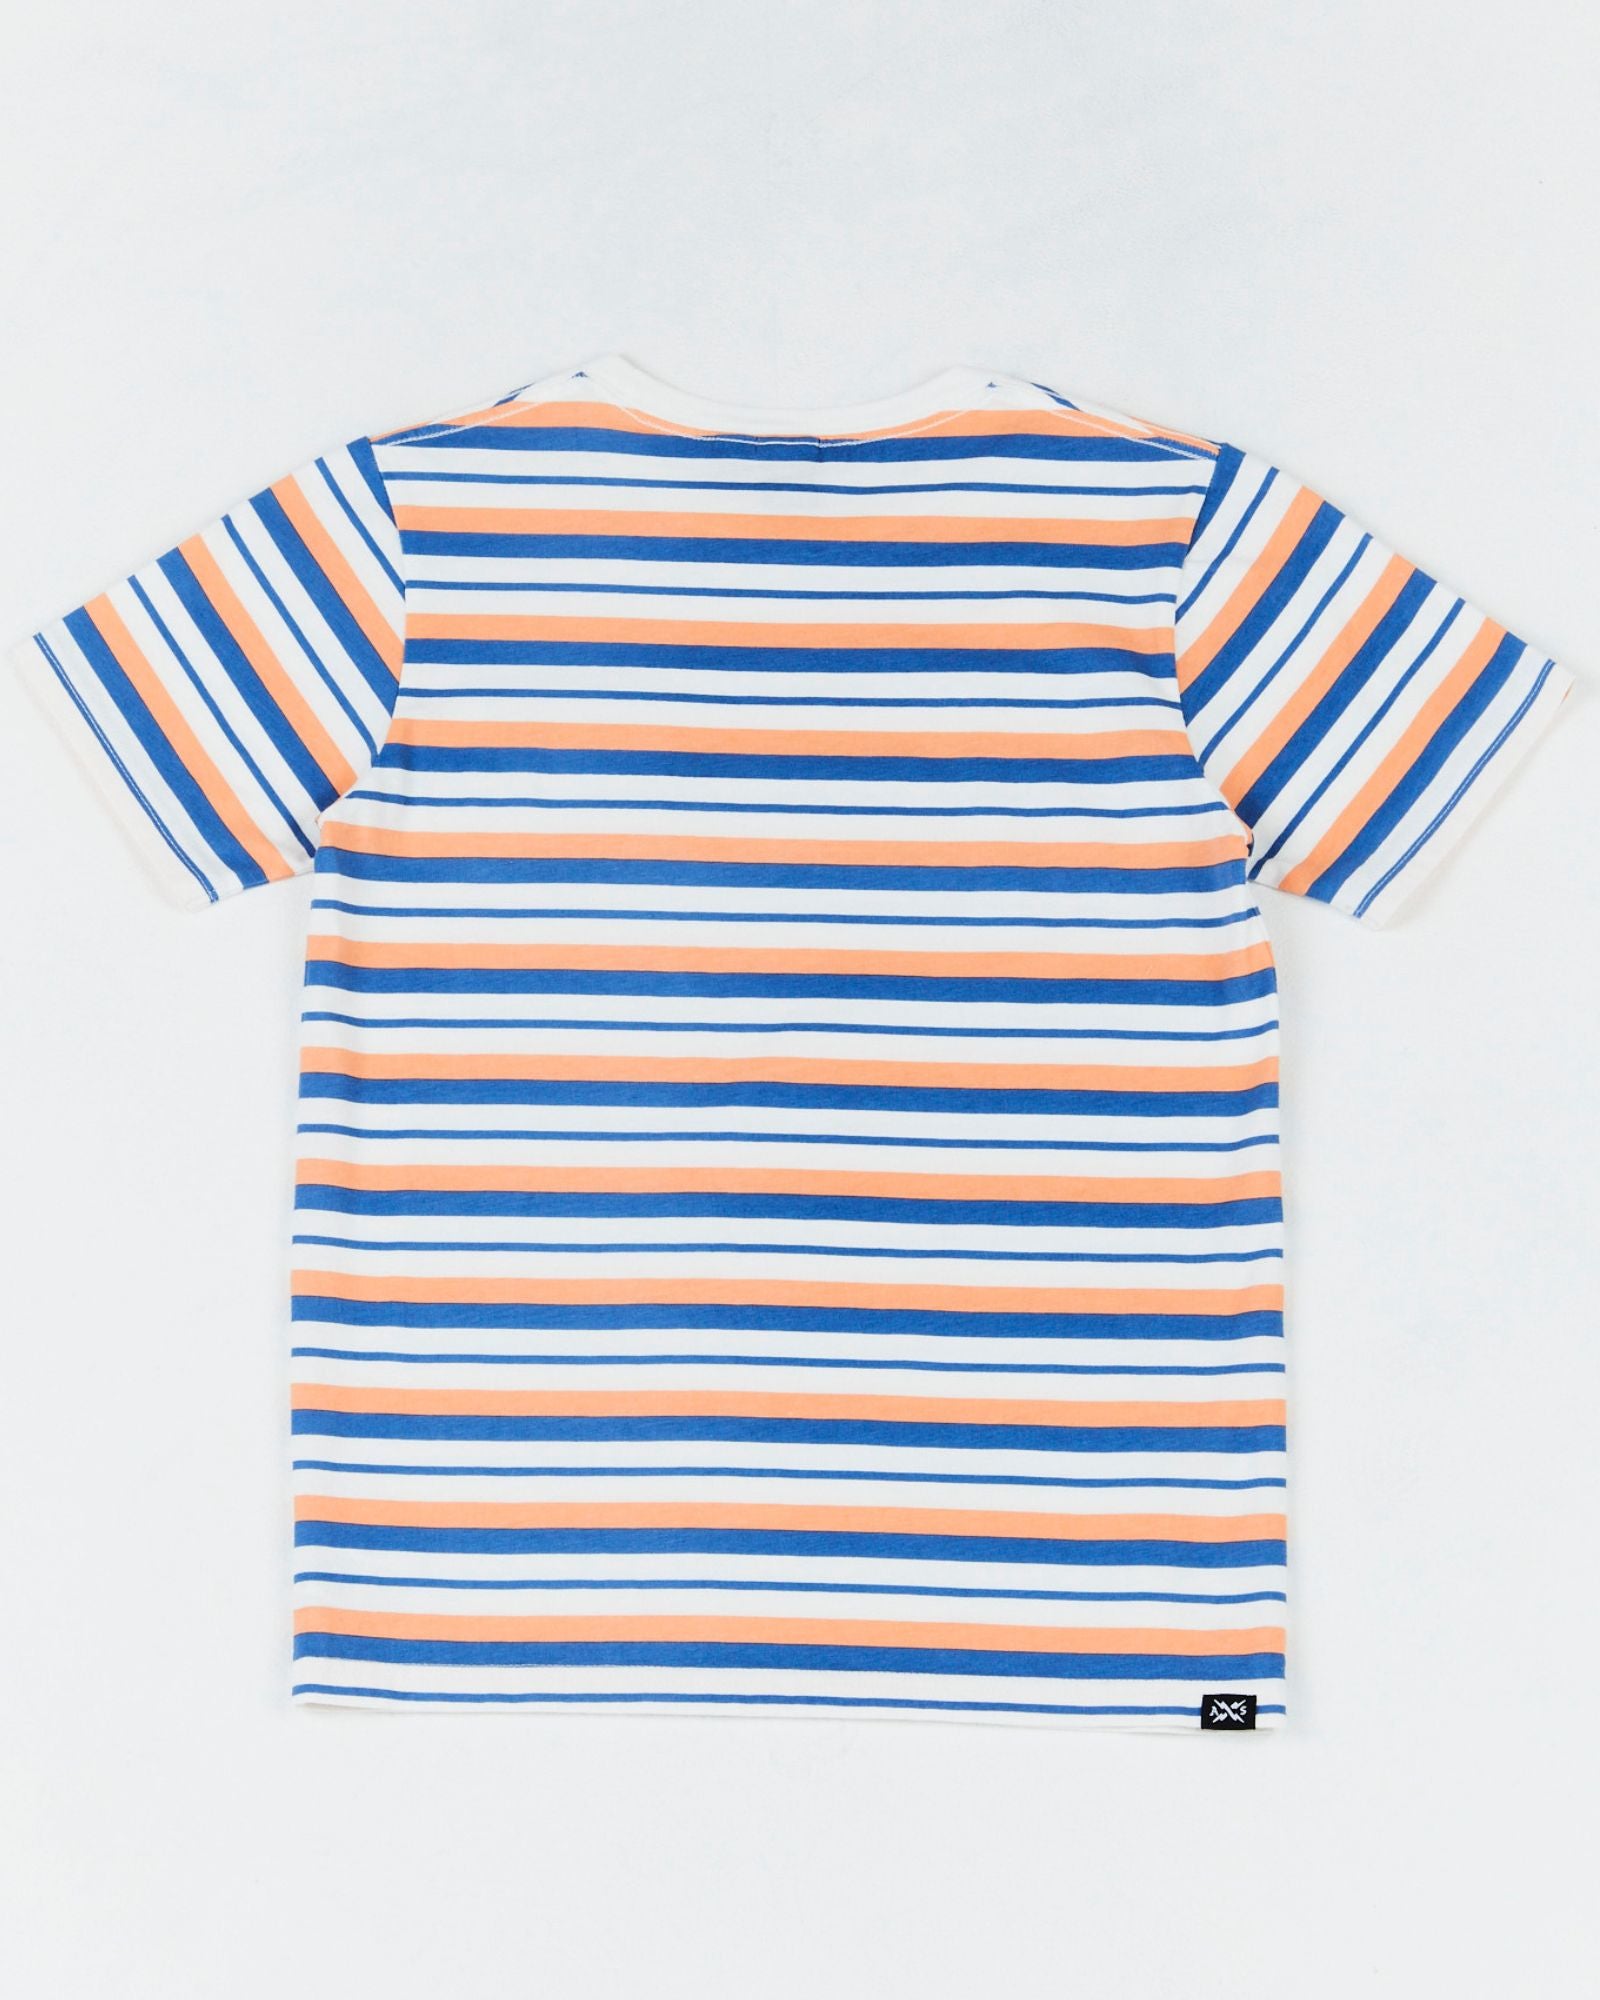 The Alphabet Soup Stripe Short Sleeve Tee for boys aged 8 to 14. Features a multicolour stripe, chest pocket with logo trim, vintage wash and 100% cotton jersey make it comfortable and stylish. Regular fit and straight hemline.